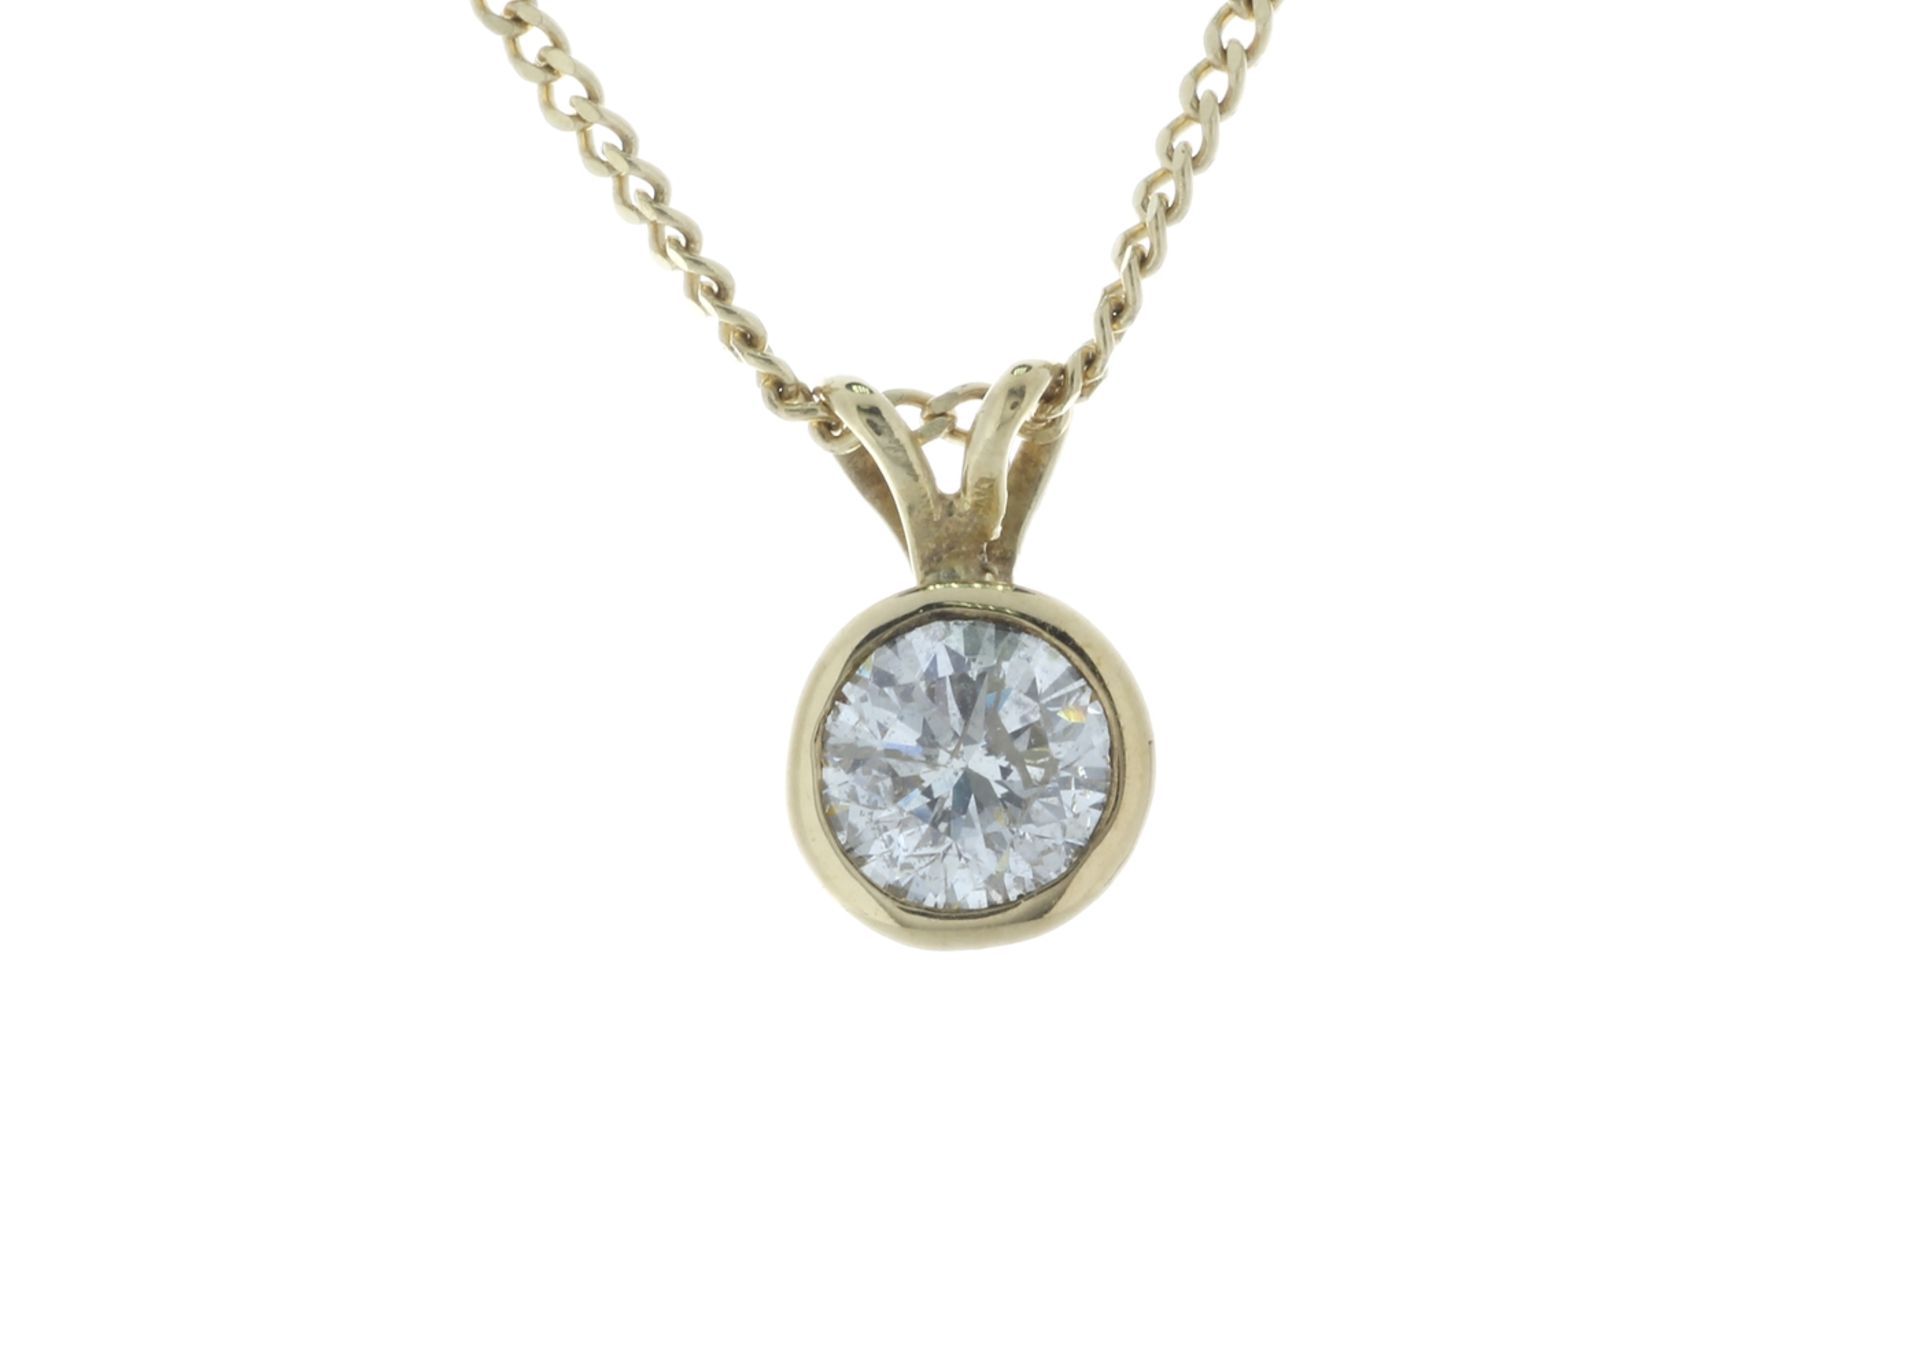 18ct Yellow Gold Rub Over Set Diamond Pendant 0.60 Carats - Valued By GIE £8,725.00 - A beautiful